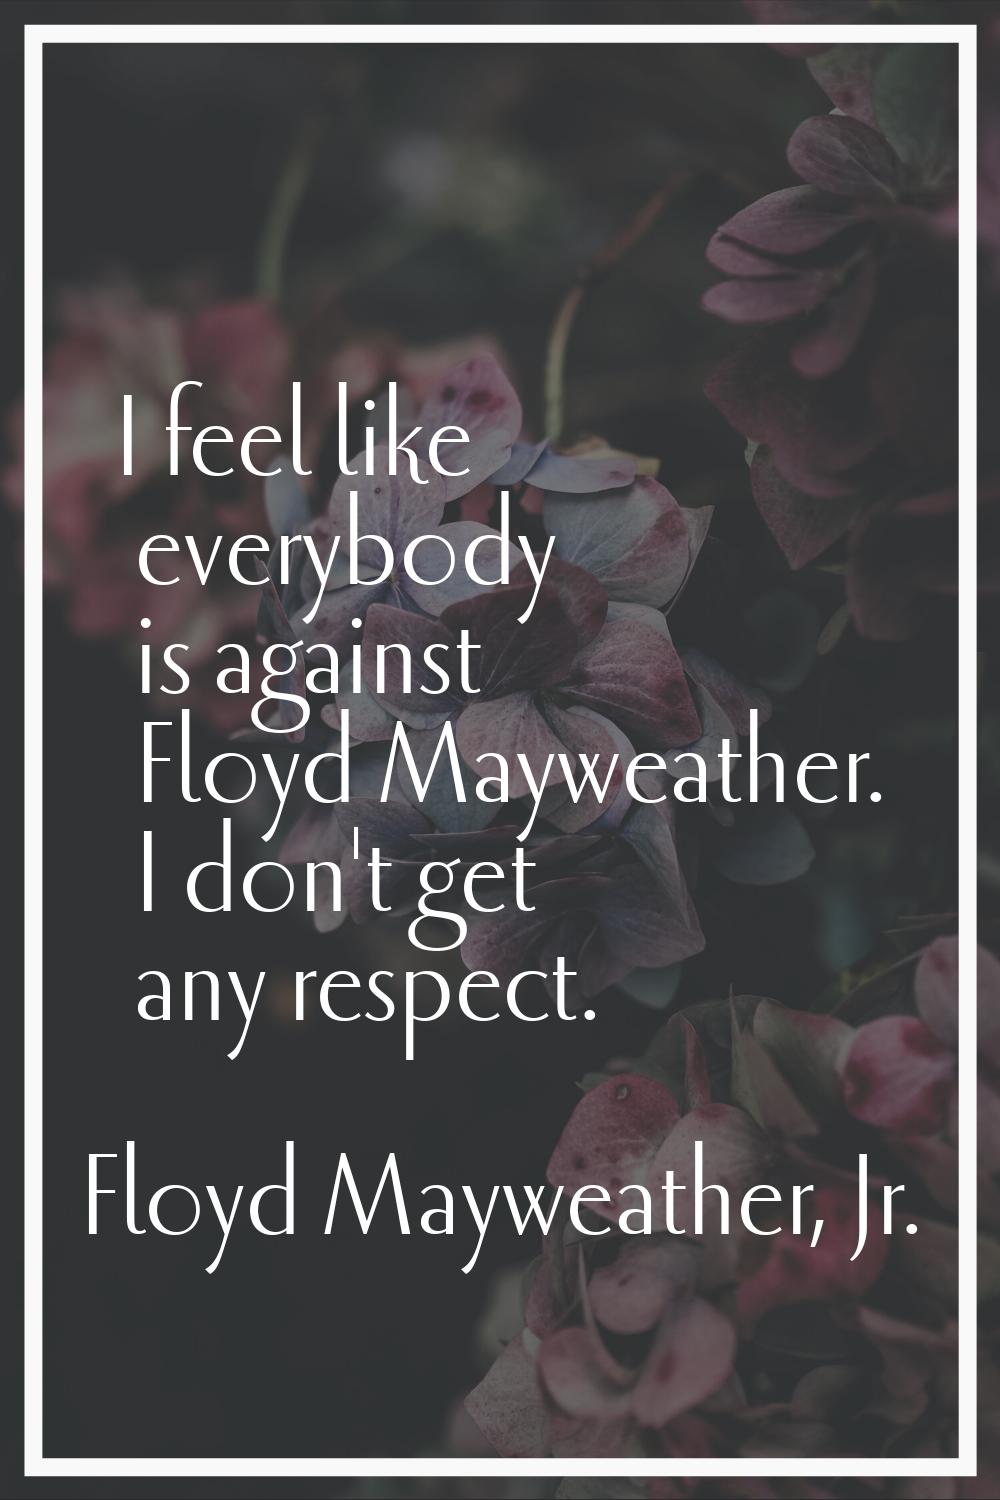 I feel like everybody is against Floyd Mayweather. I don't get any respect.